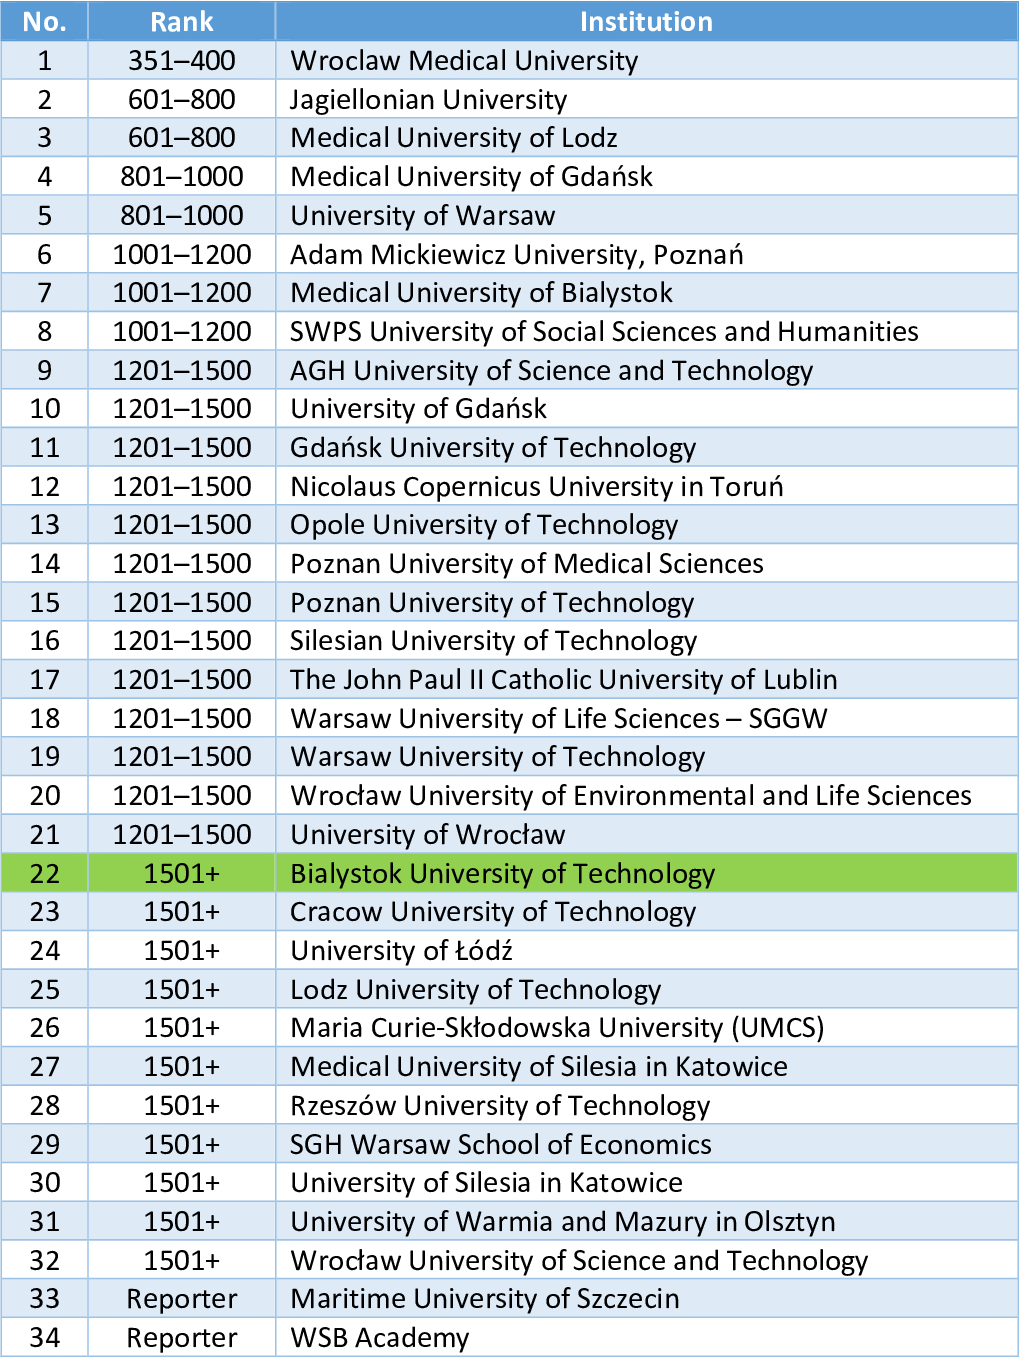 times higher education ranking for computer science